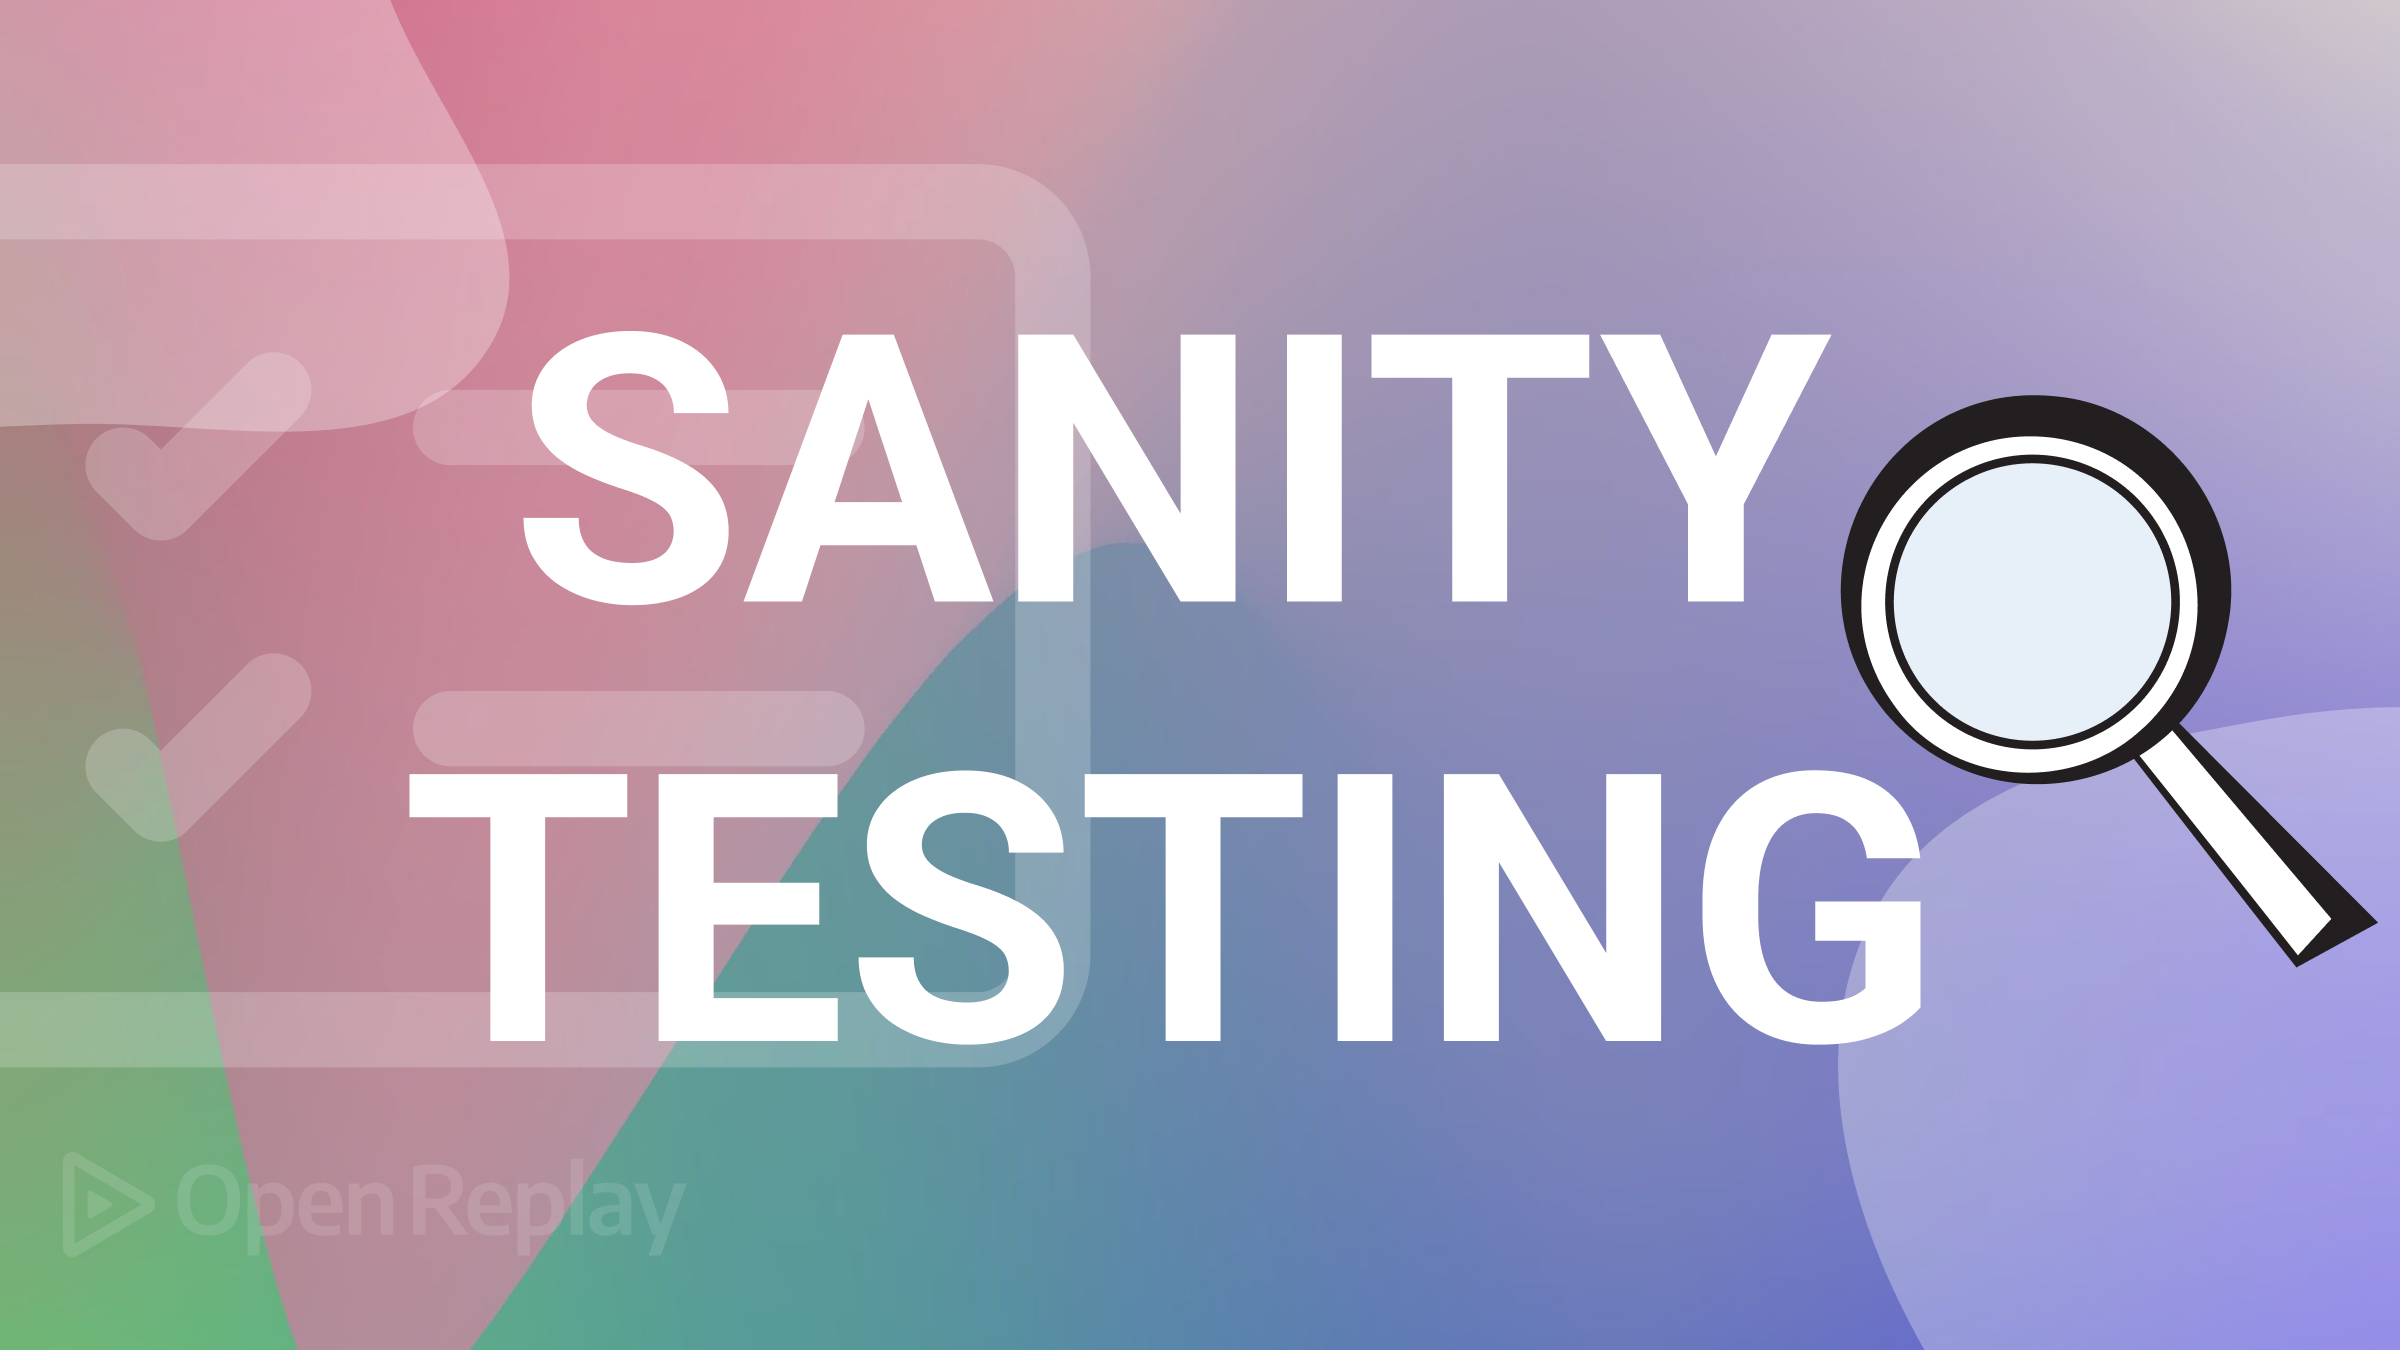 Heard About Sanity Testing?